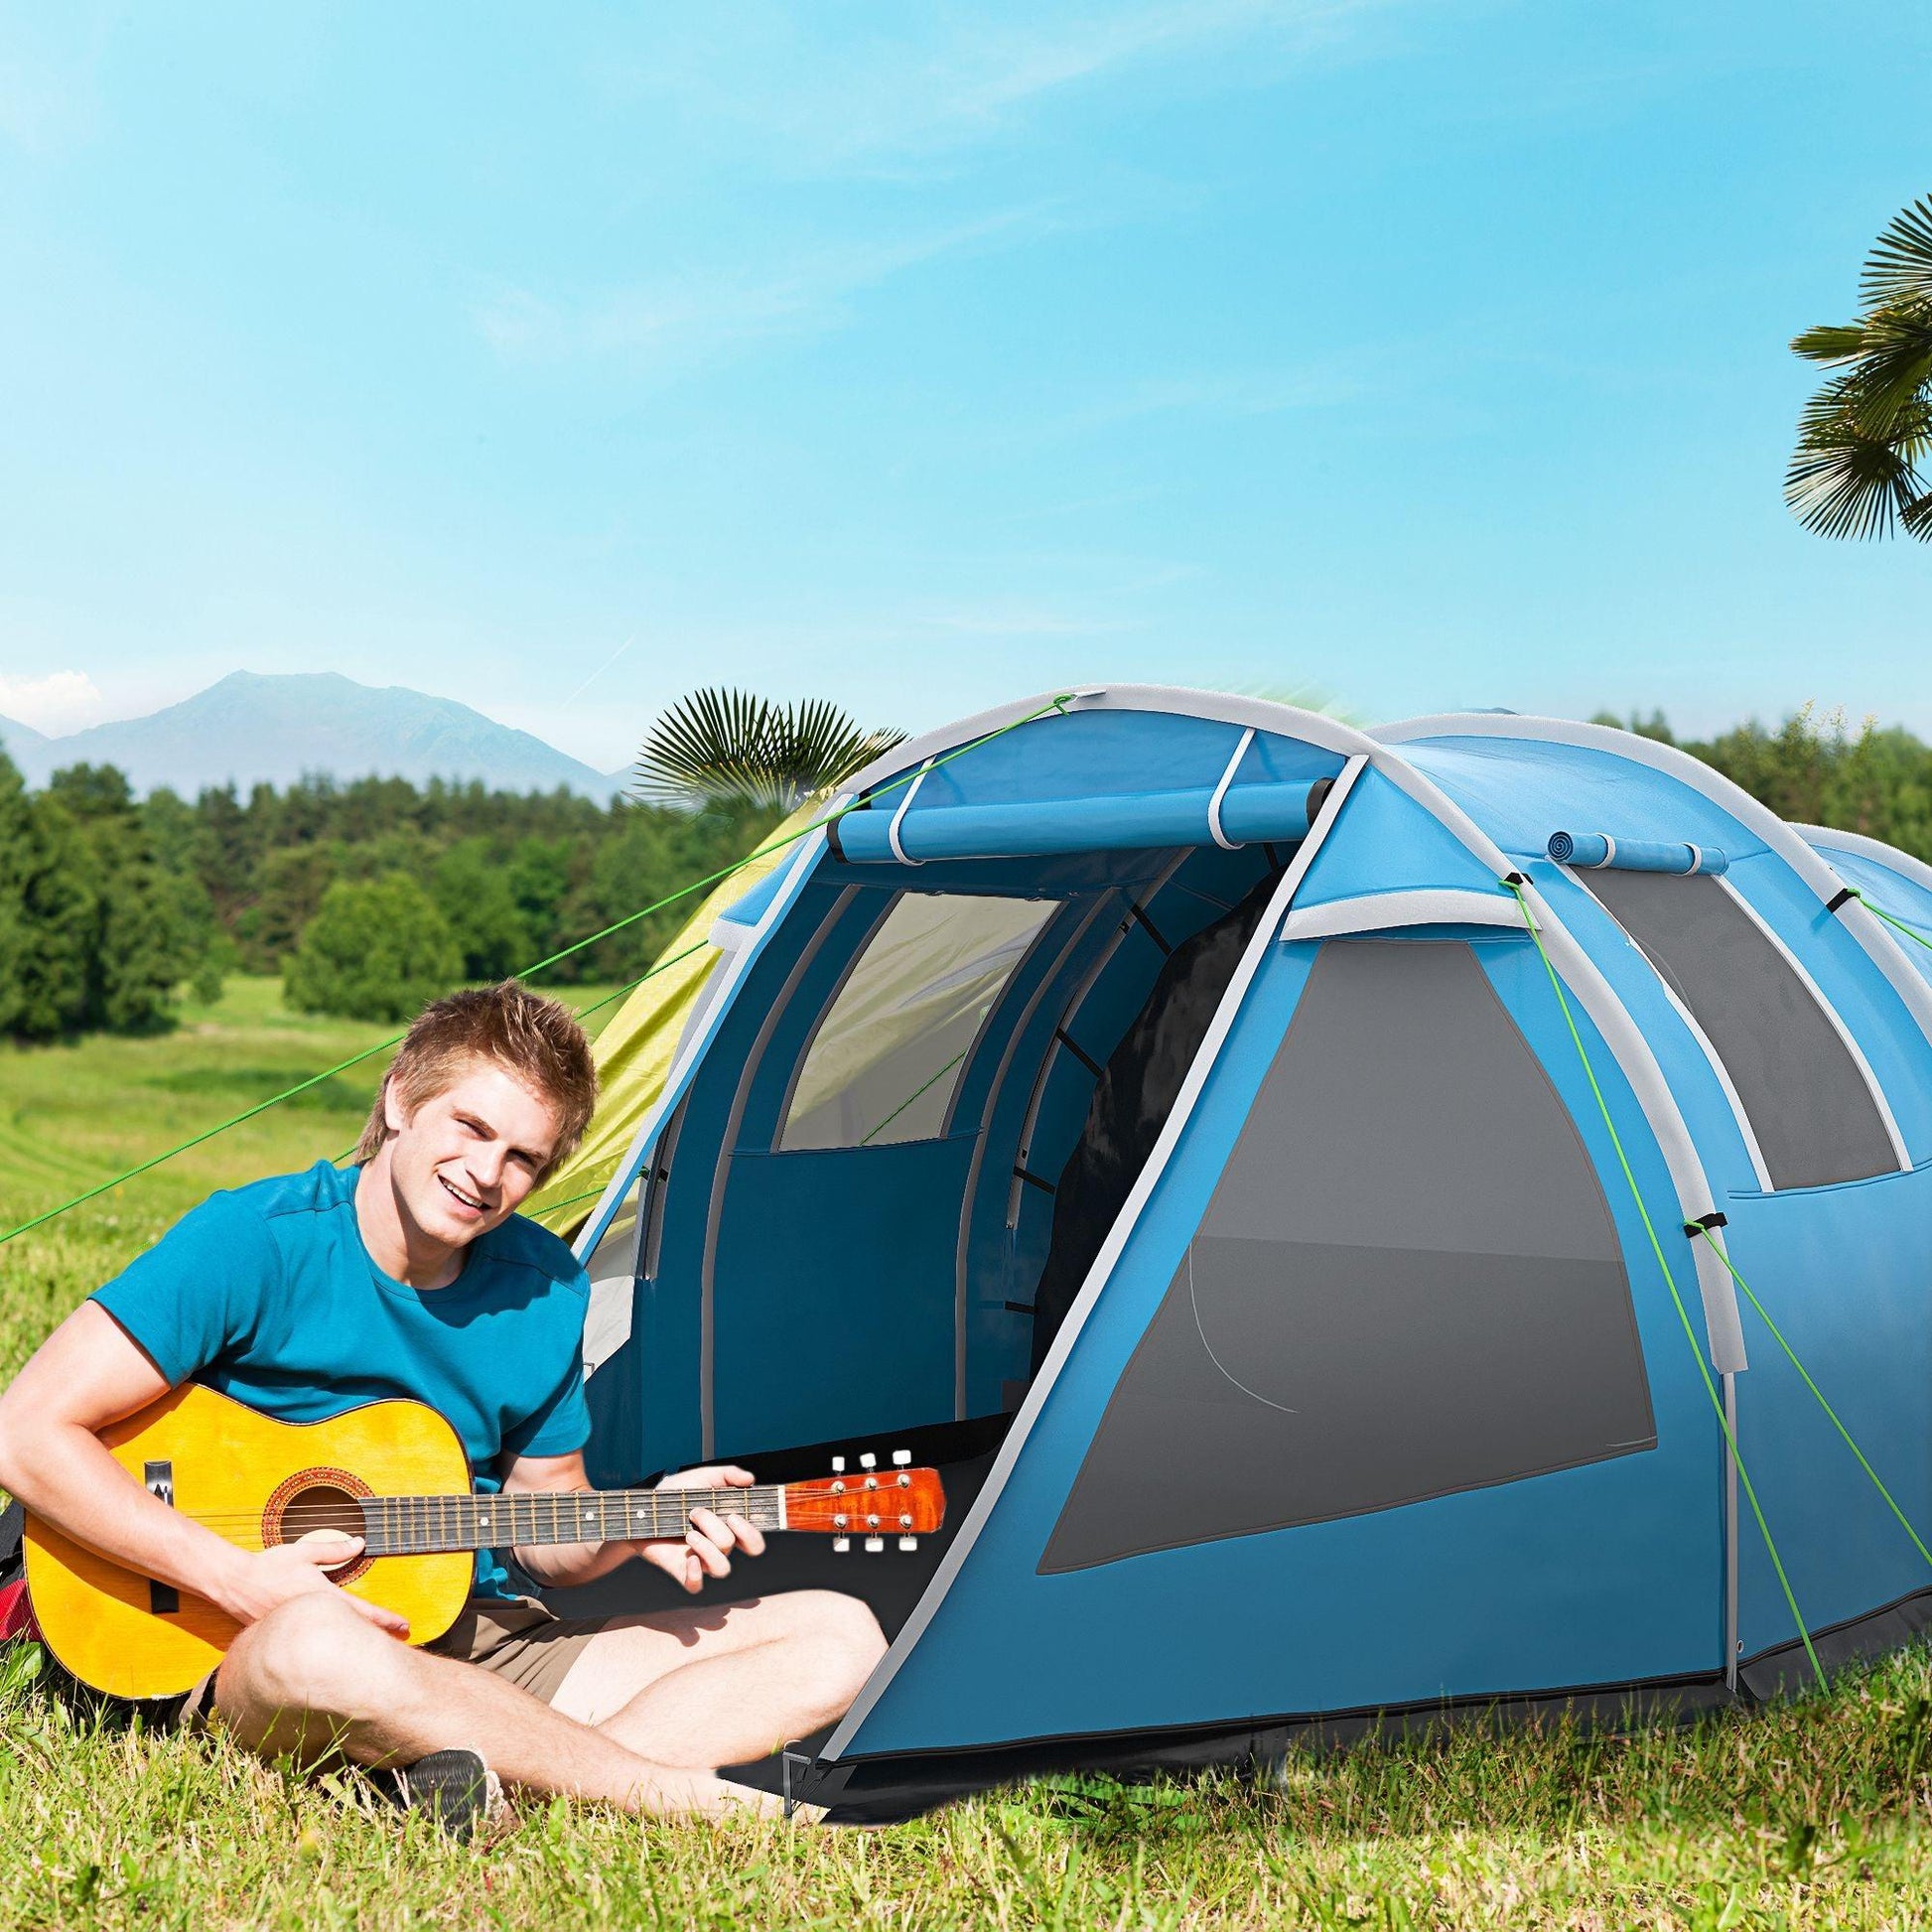 Outsunny Tunnel Tent: Portable & Spacious for Camping - ALL4U RETAILER LTD